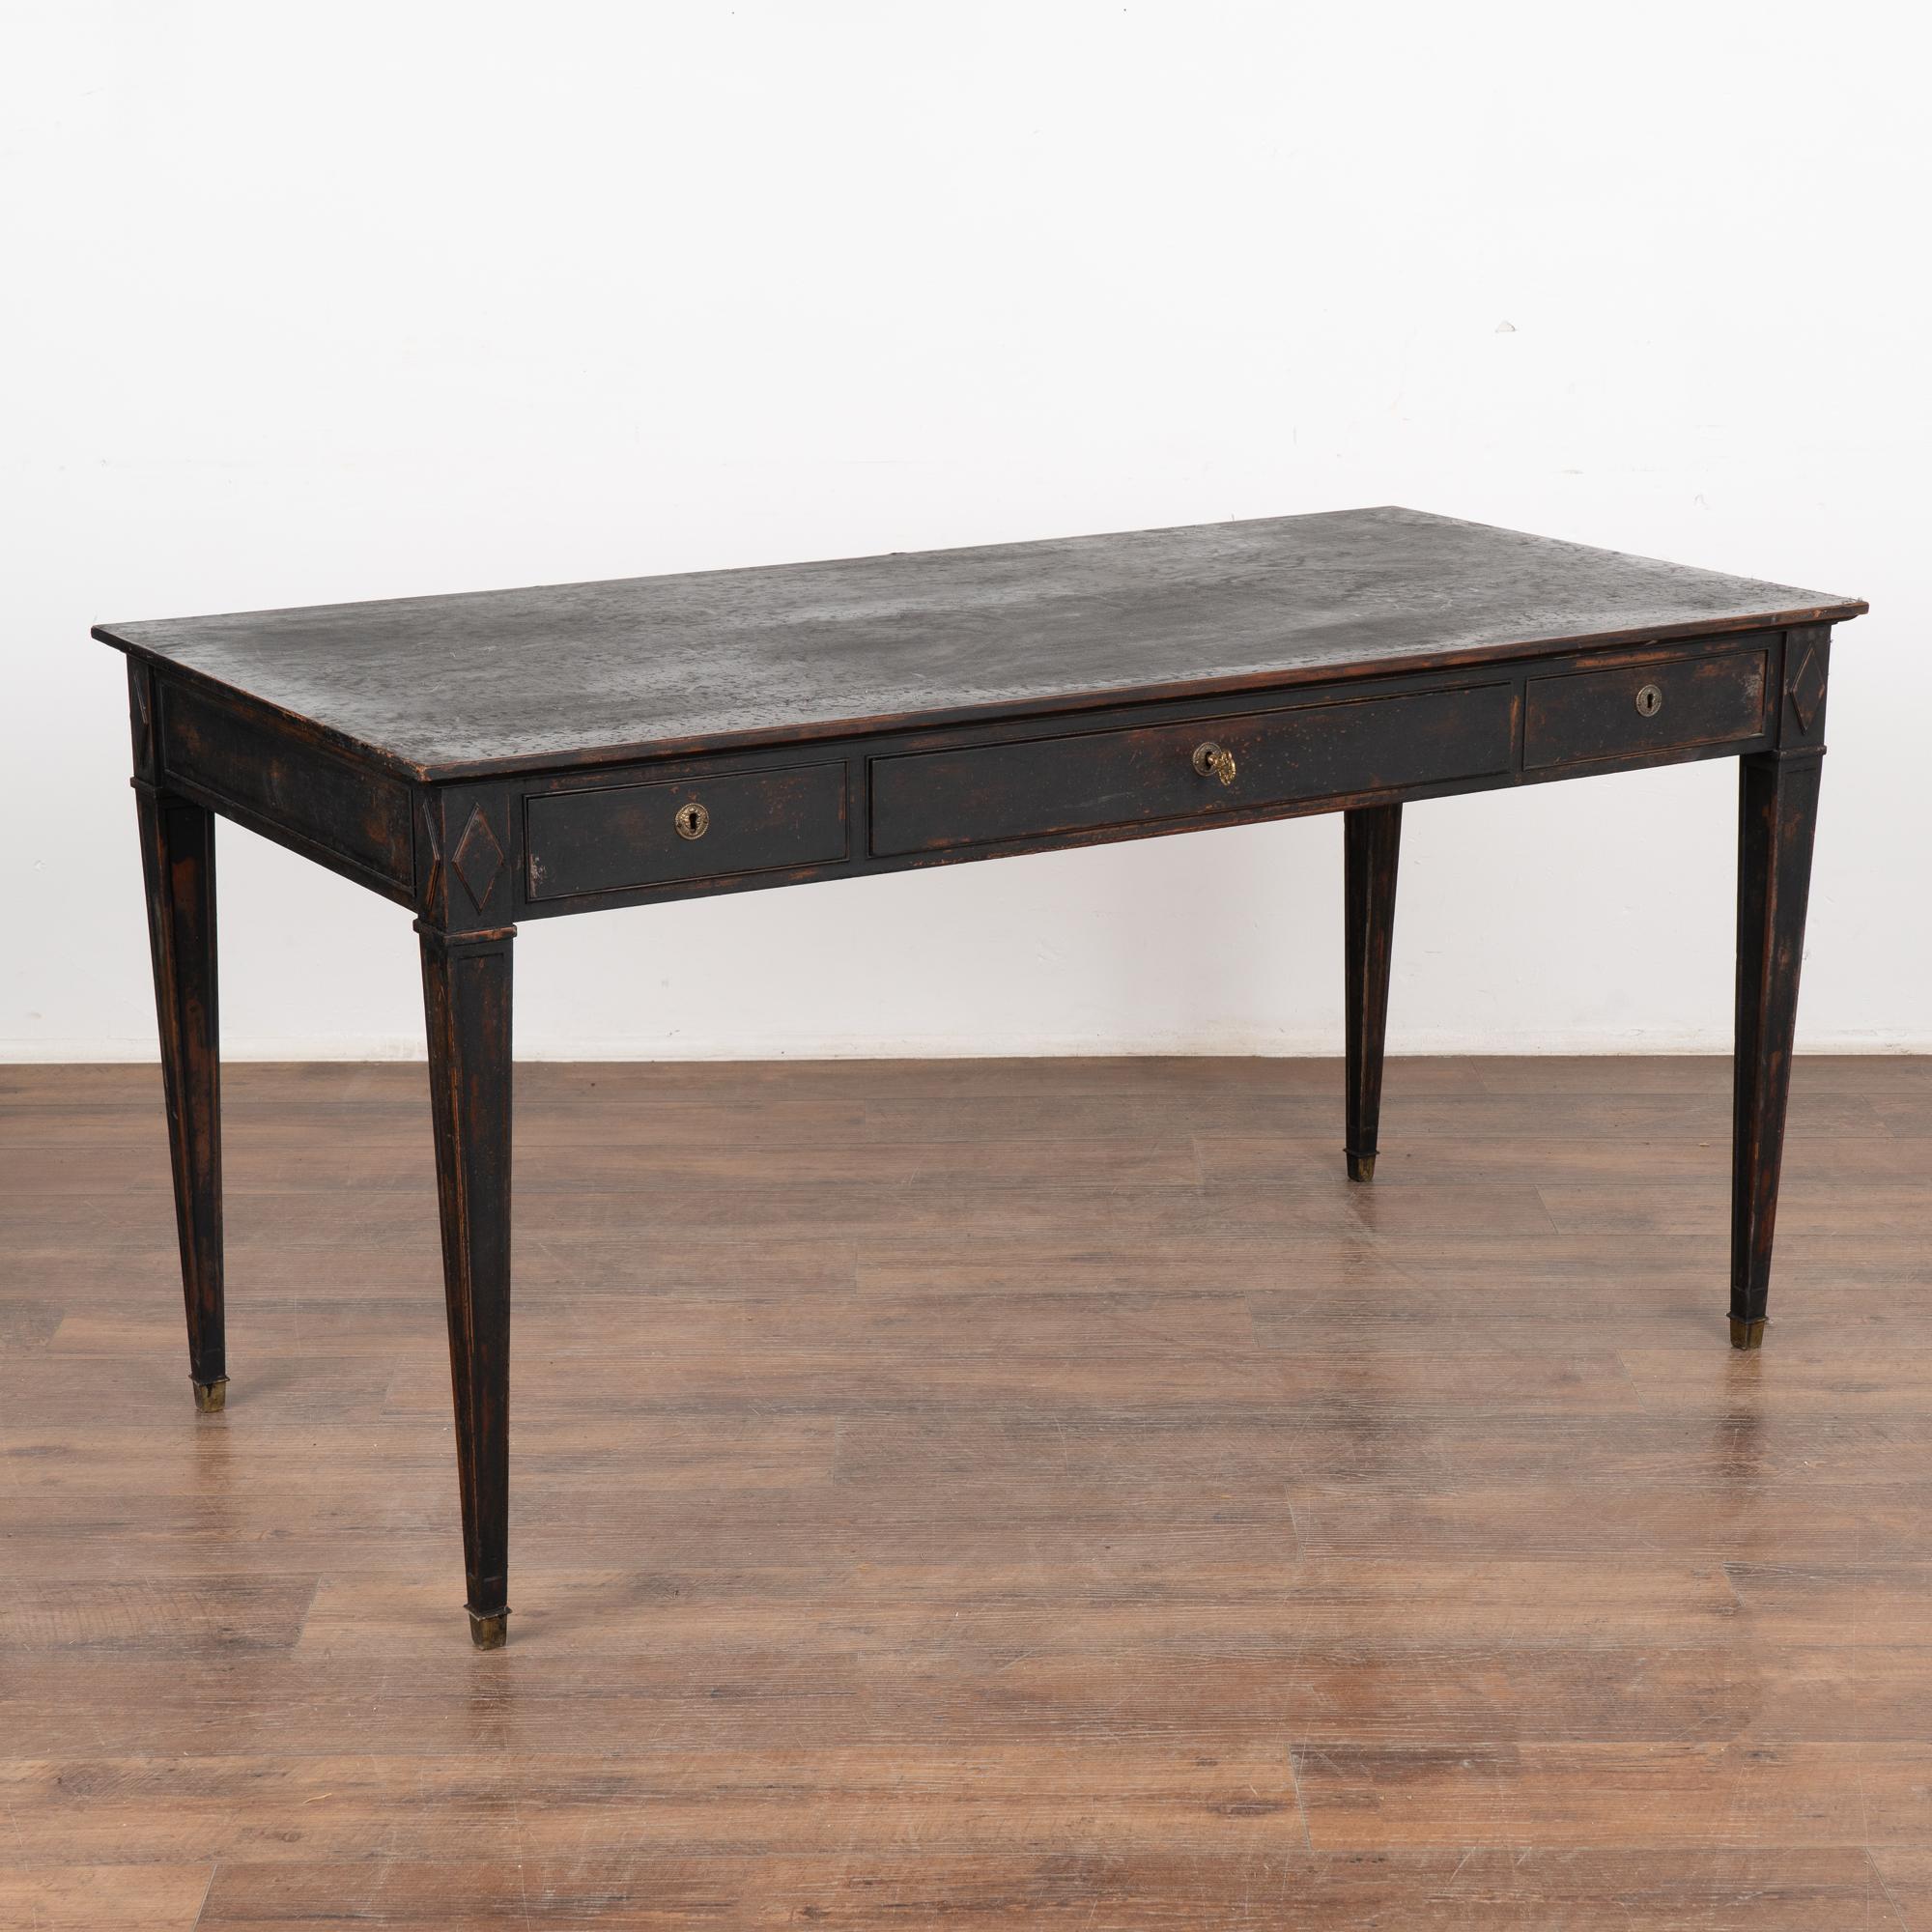 Three drawer pine desk with tapered legs topped by diamond accent.
Restored, handsome black painted finish is lightly distressed fitting the age and grace of this lovely writing table. 
The old locks on each of the three drawers still function with